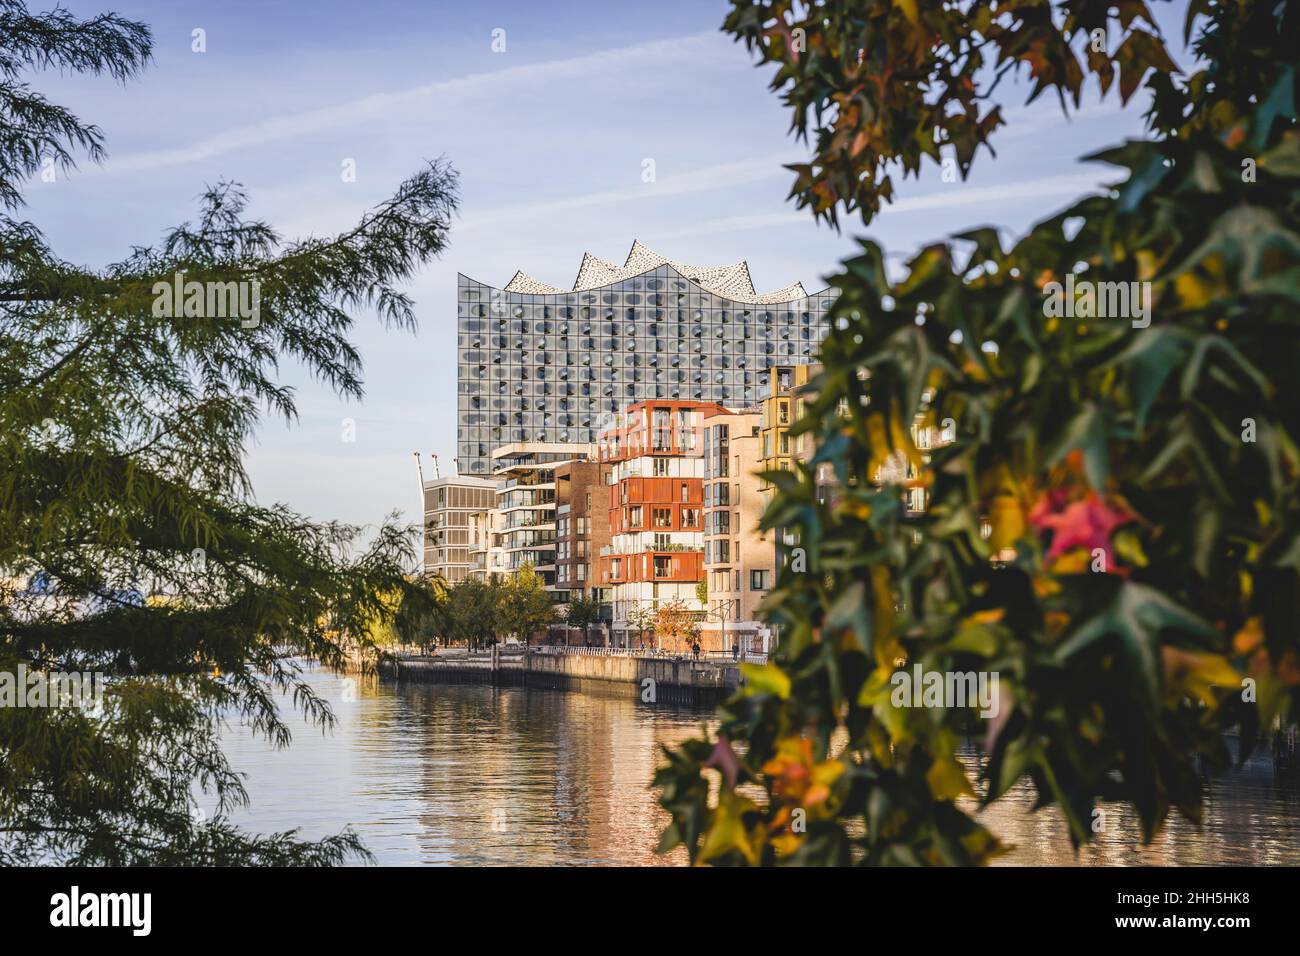 Germany, Hamburg, Elbe river canal with Elbphilharmonie in background Stock Photo